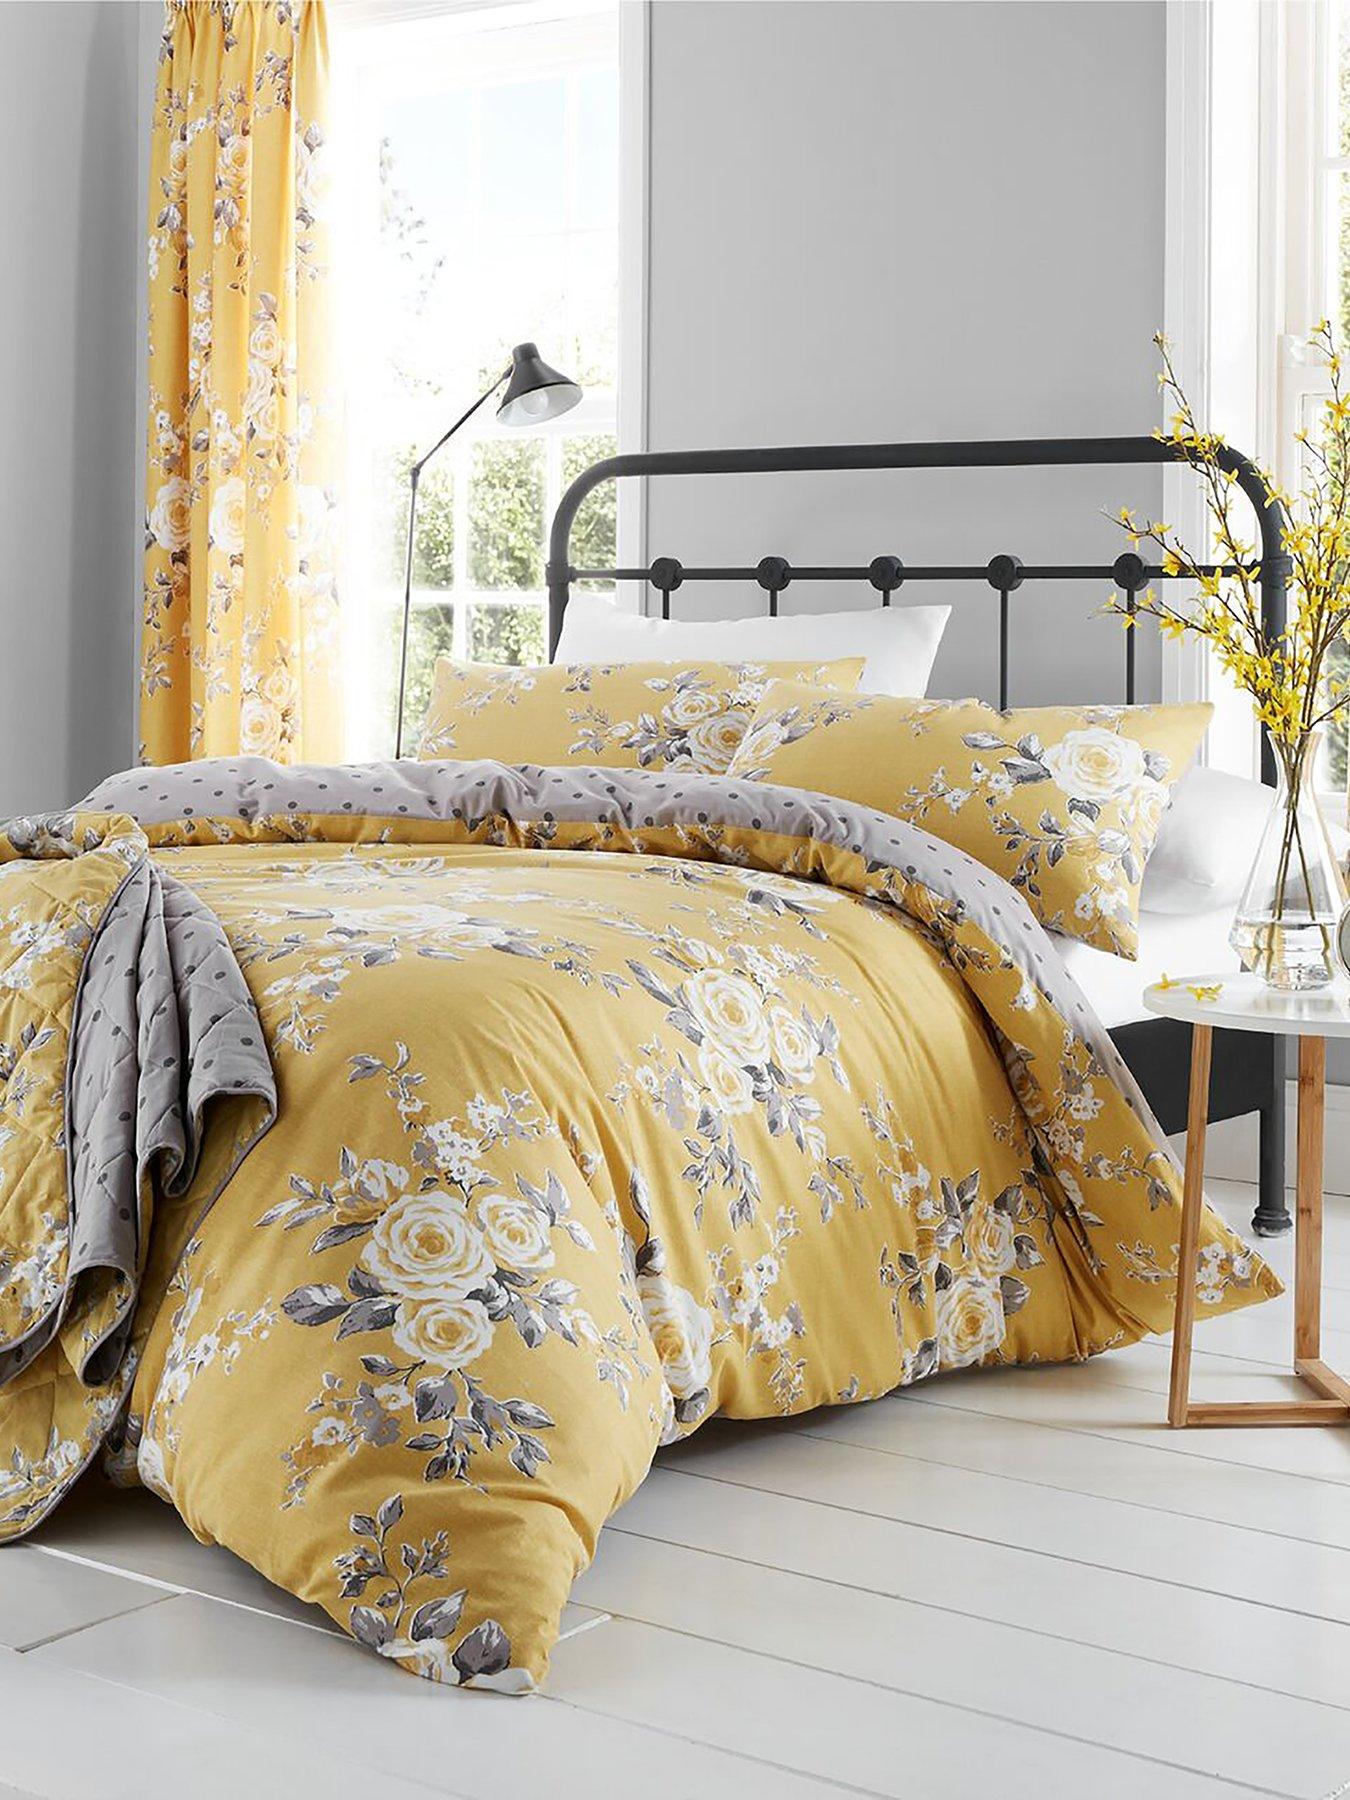 Cotton Catherine Lansfield Oriental Blossom Duvet Cover Pillowcase for 90 cm Bed Yellow 160 x 220 50 x 110 cm 2 